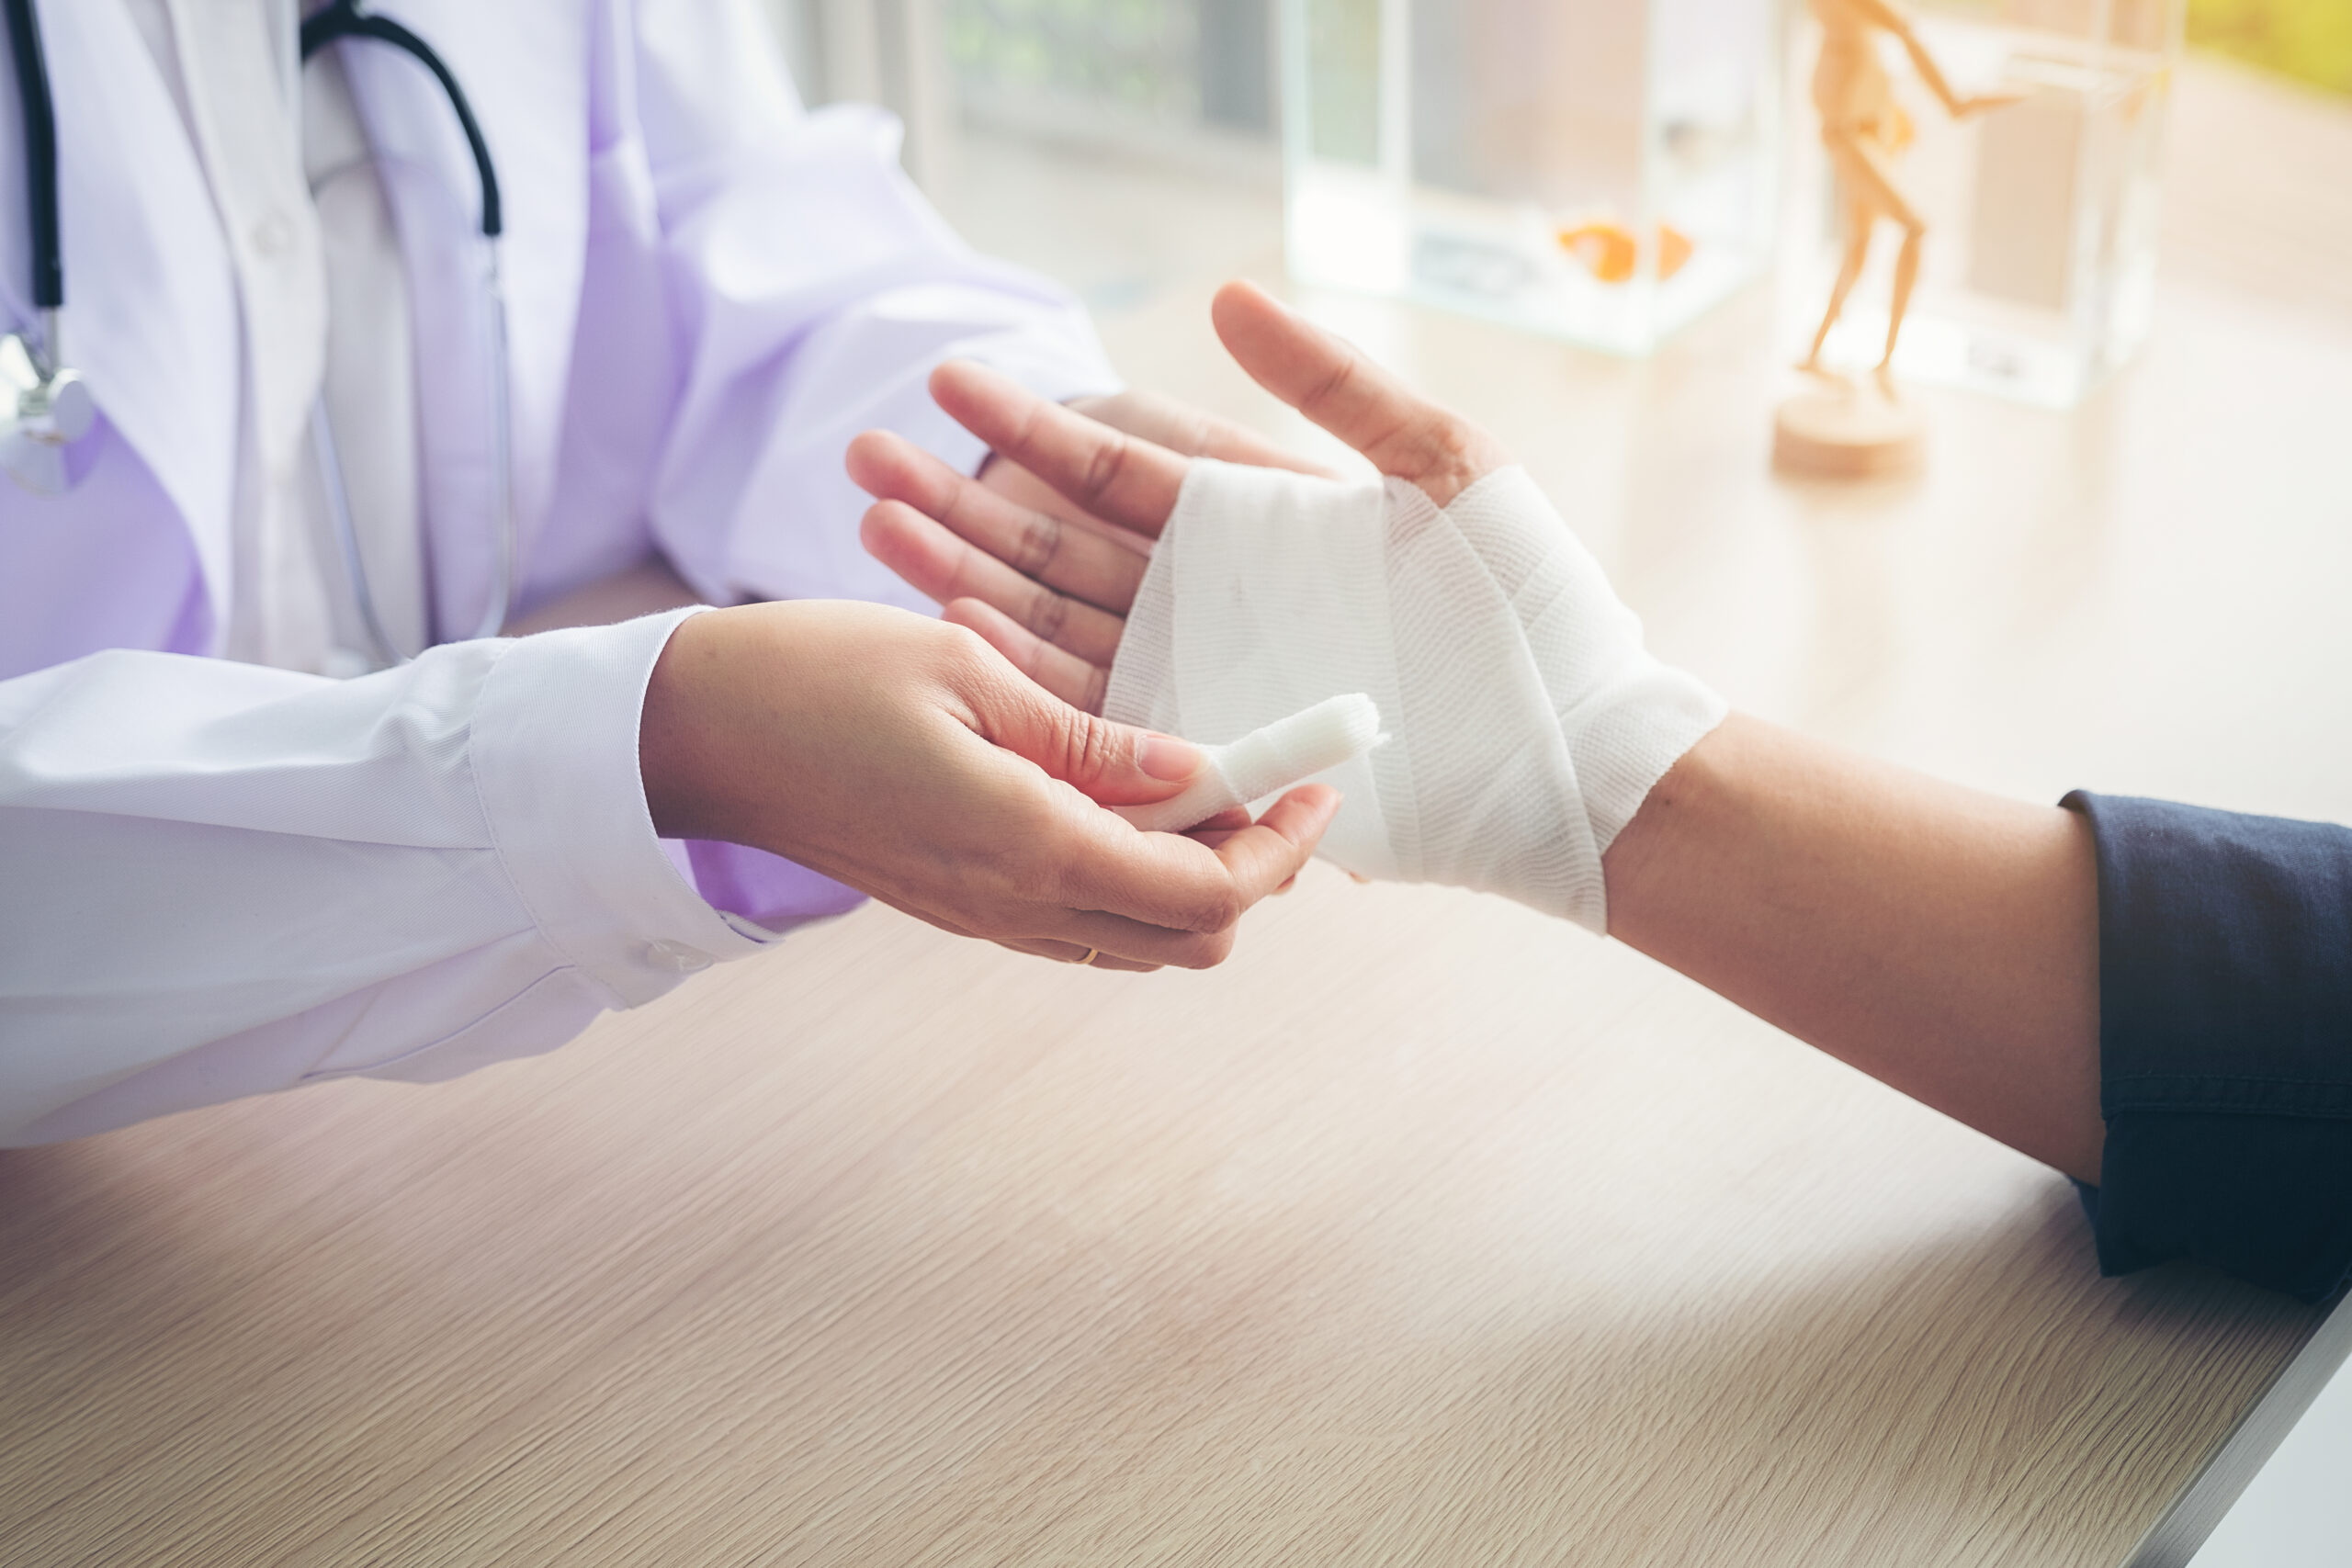 First aid and treatment in wrist injuries and disorders, Traumat